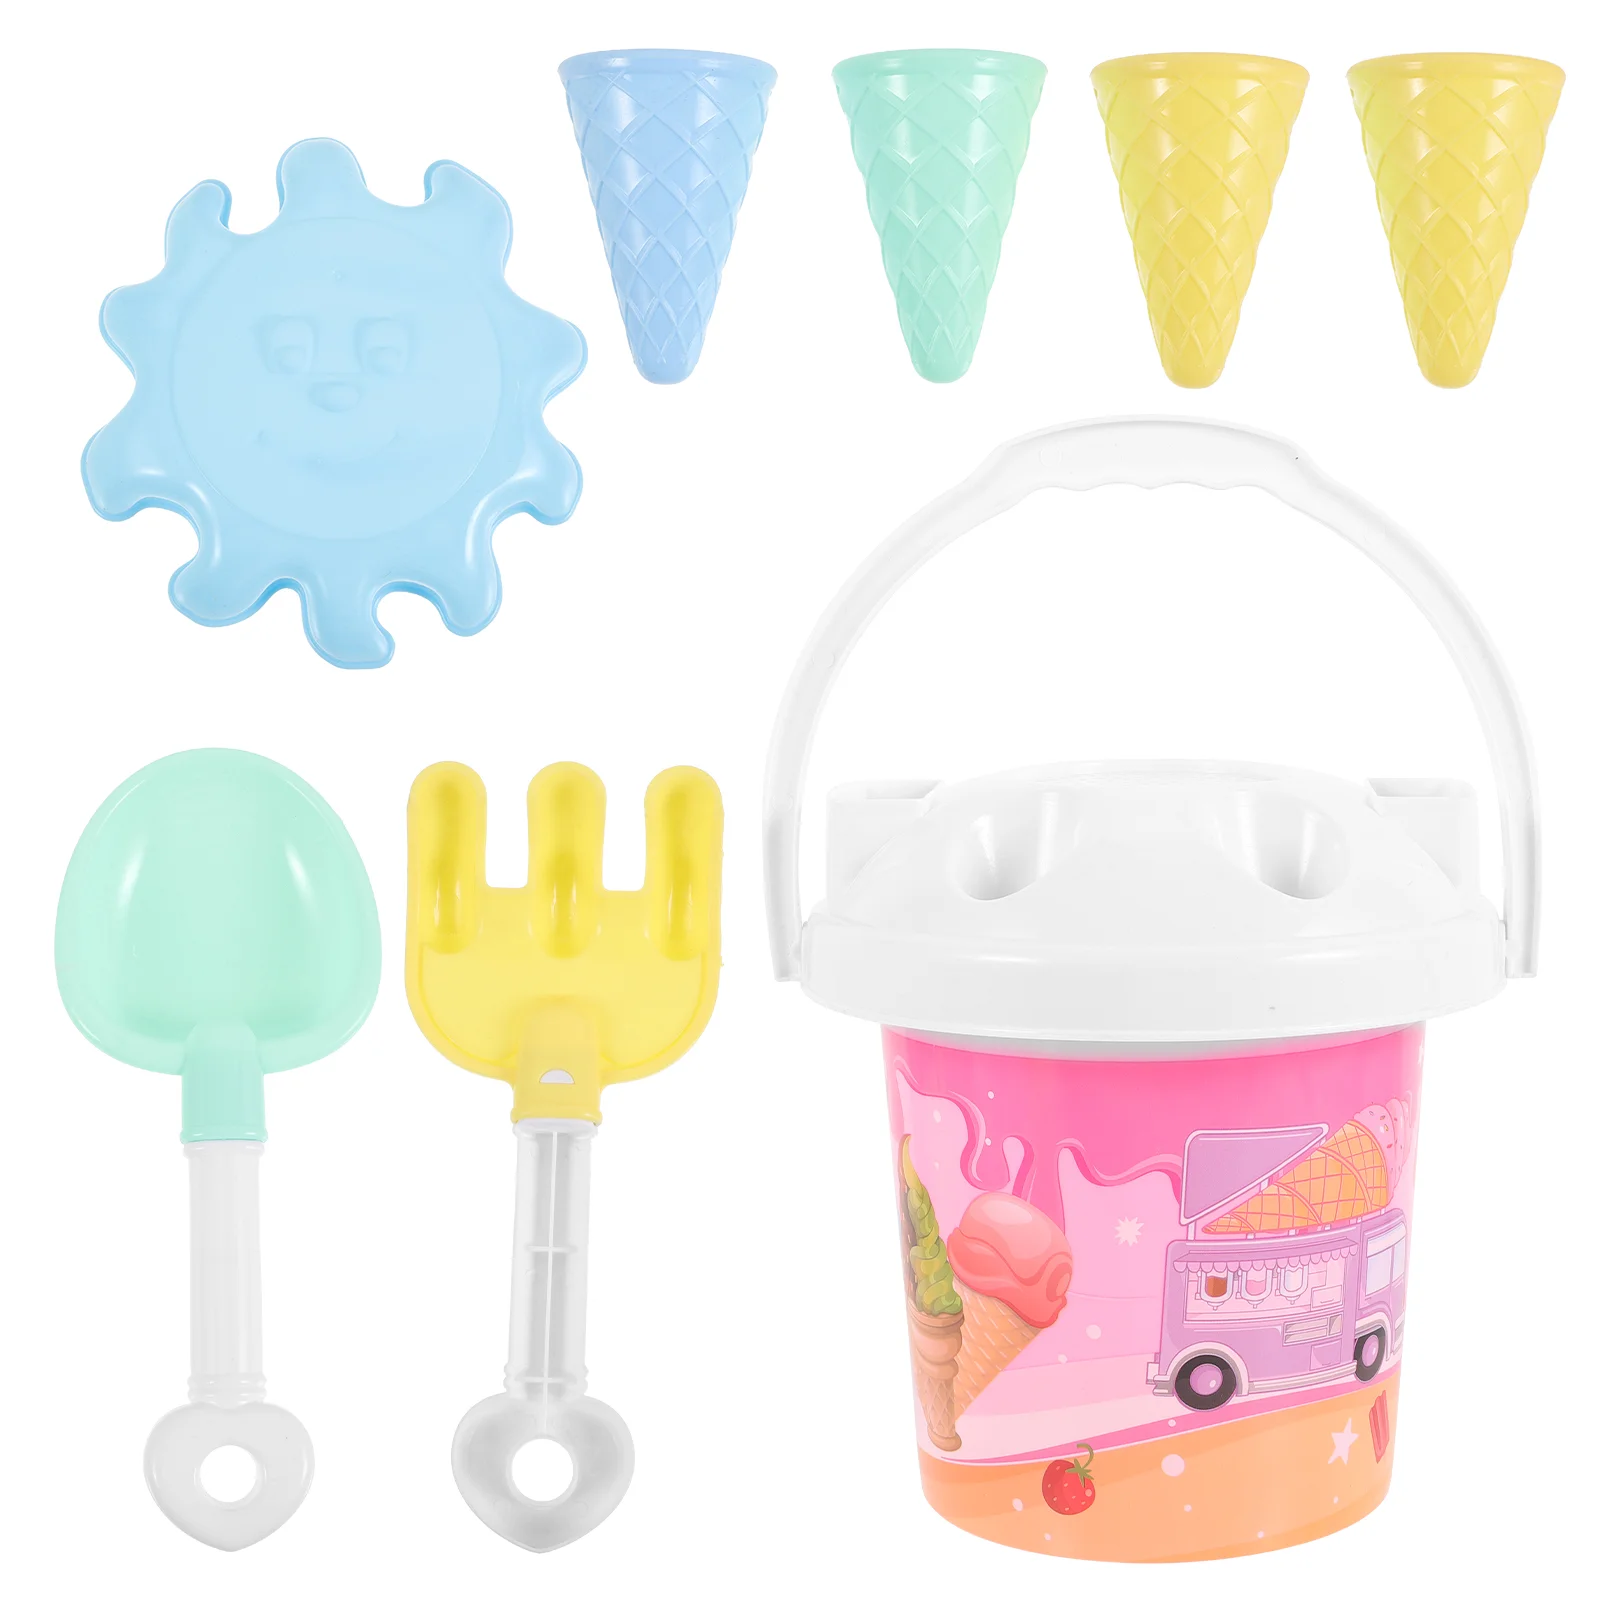 

1set Race Beach Toys Sand Toys Ice Cream Mold Set for Kids 3-10 with Beach Toy Bucket Pail for Kids and Toddlers (Random Color)